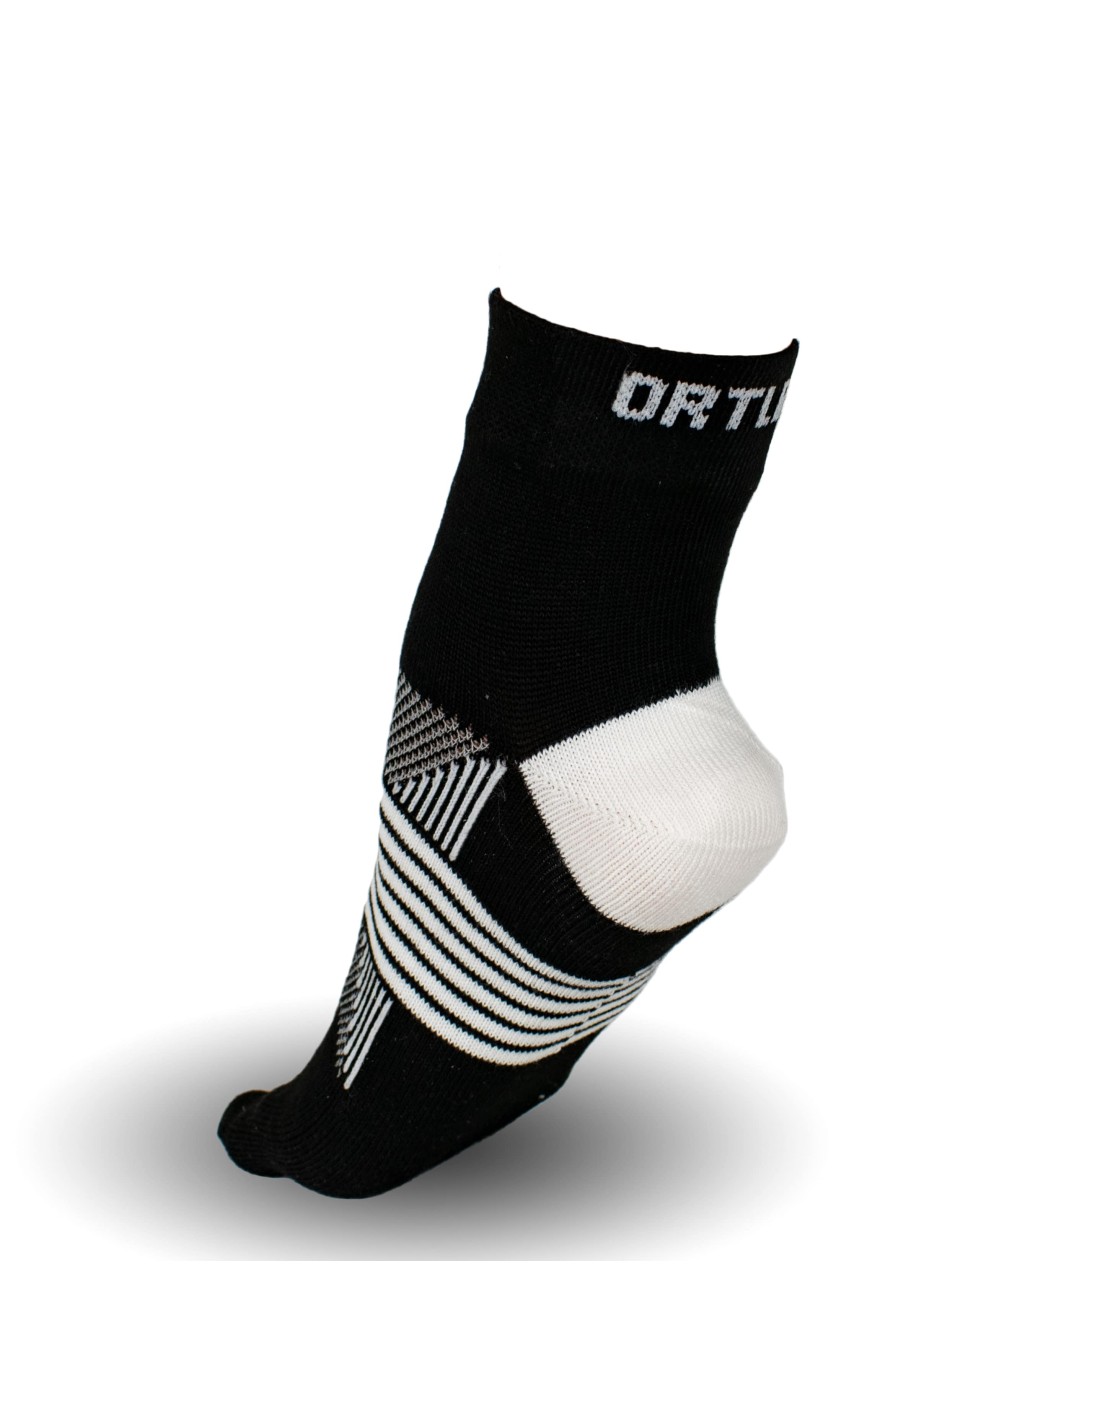 KIT 3 chaussettes hautes Ortles - Chaussettes Trail Running 5 doigts